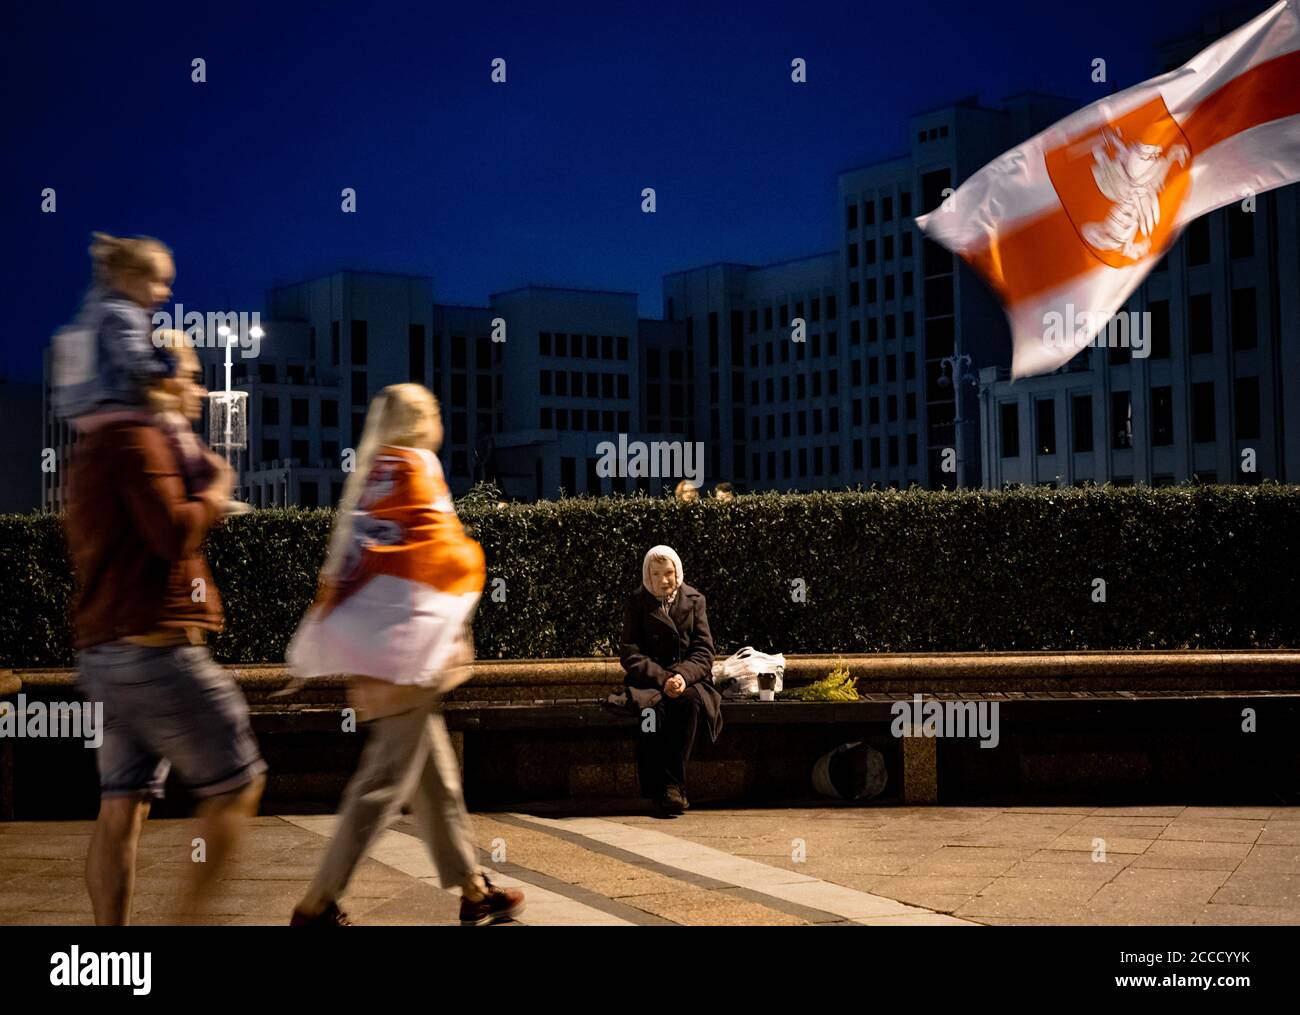 Minsk, Belarus - August 21, 2020: Belarusian people participate in peaceful protest after presidential elections in Belarus on Independence Square in Stock Photo